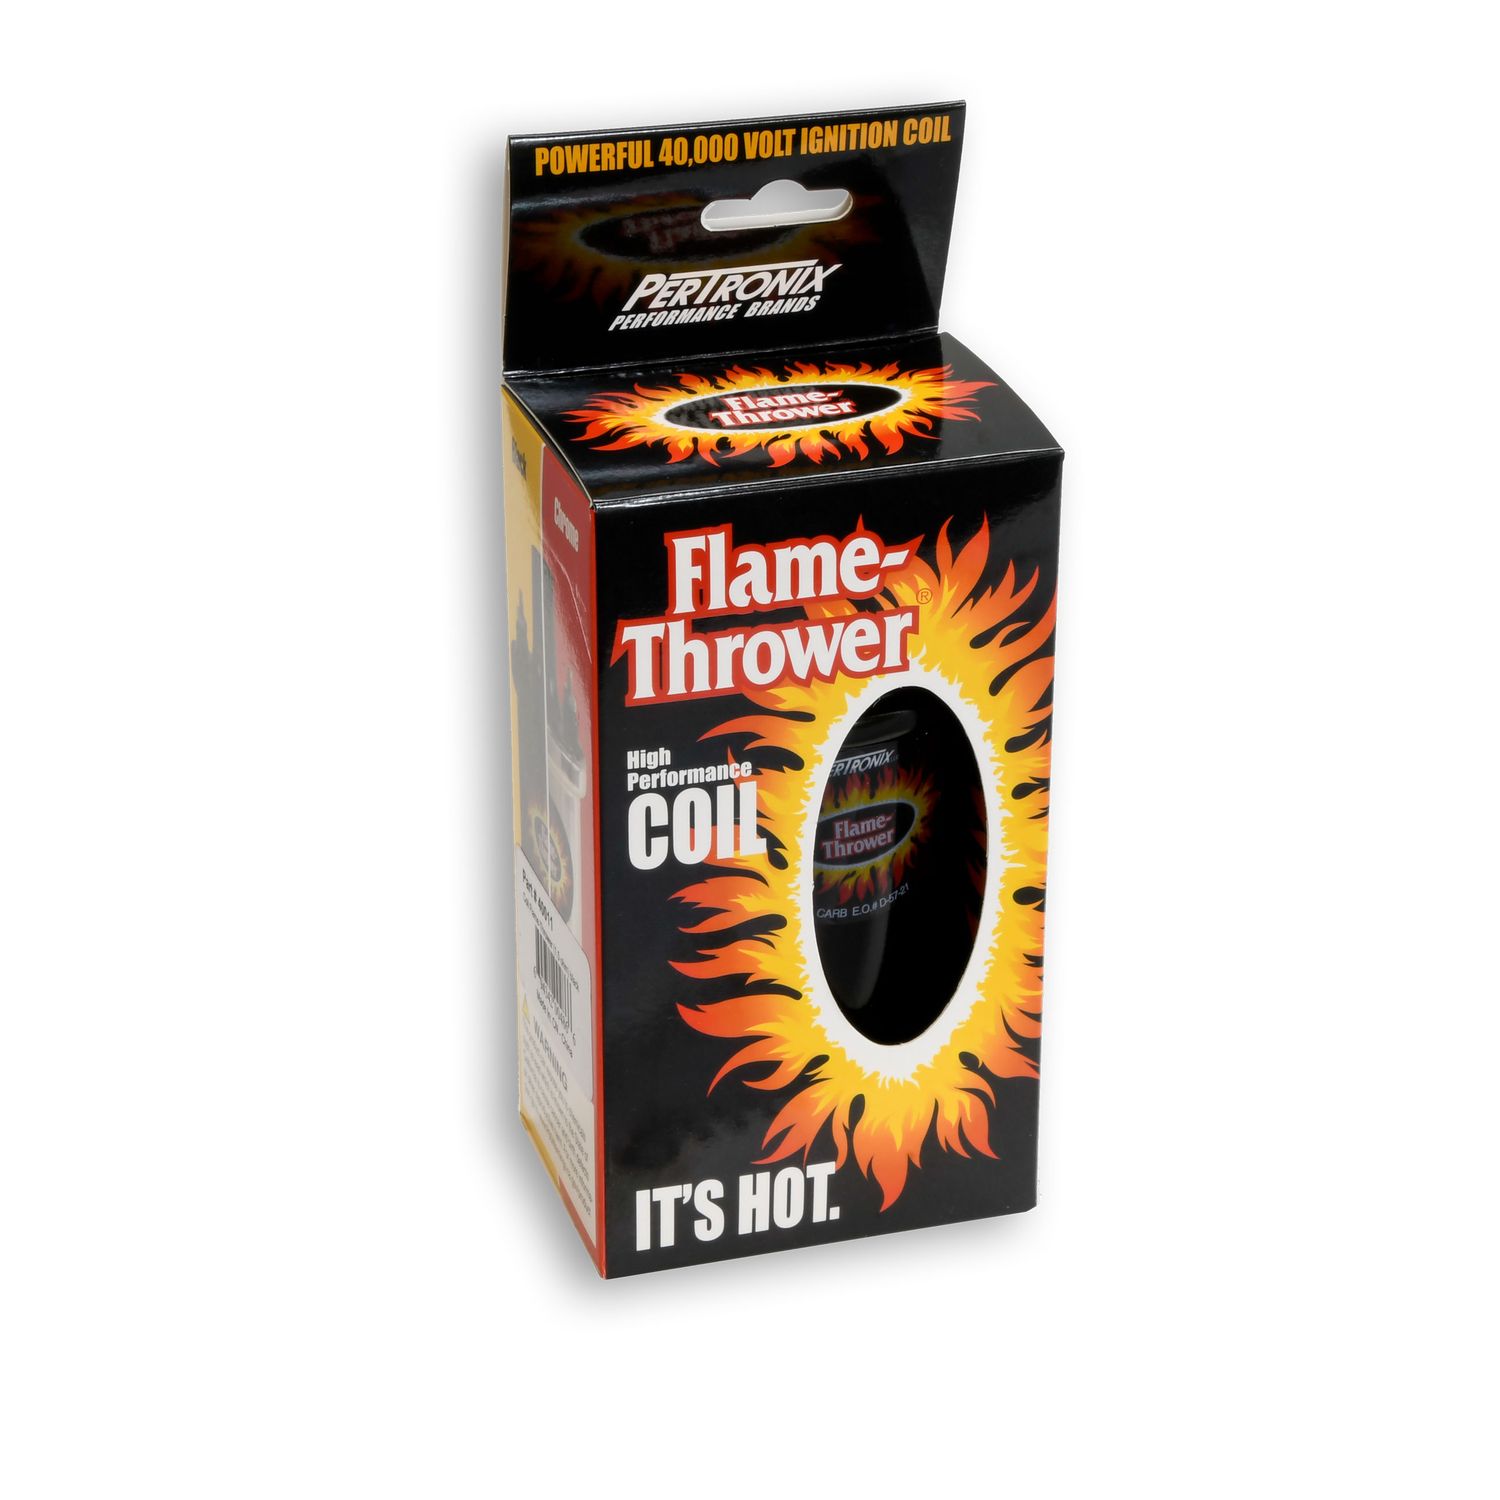 Pertronix 40011 Flame-Thrower Coil 40,000 Volt 1.5 ohm Black - image 3 of 4